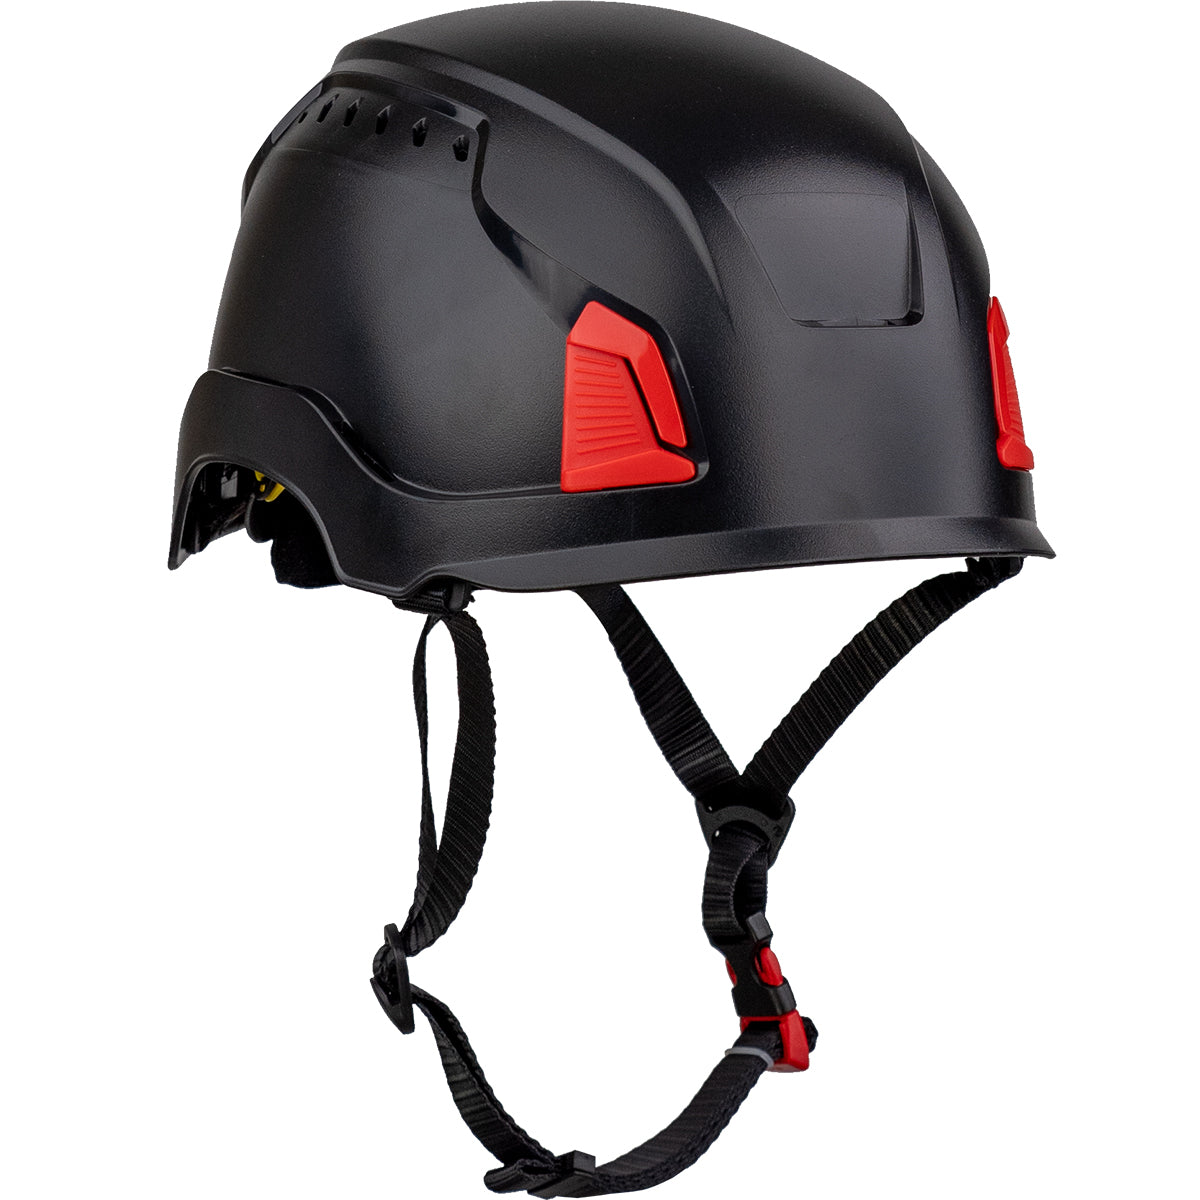 Traverse™ Vented, Industrial Climbing Helmet with Mips® Technology, ABS Shell, EPS Foam Impact Liner, HDPE Suspension, Wheel Ratchet Adjustment and 4-Point Chin Strap